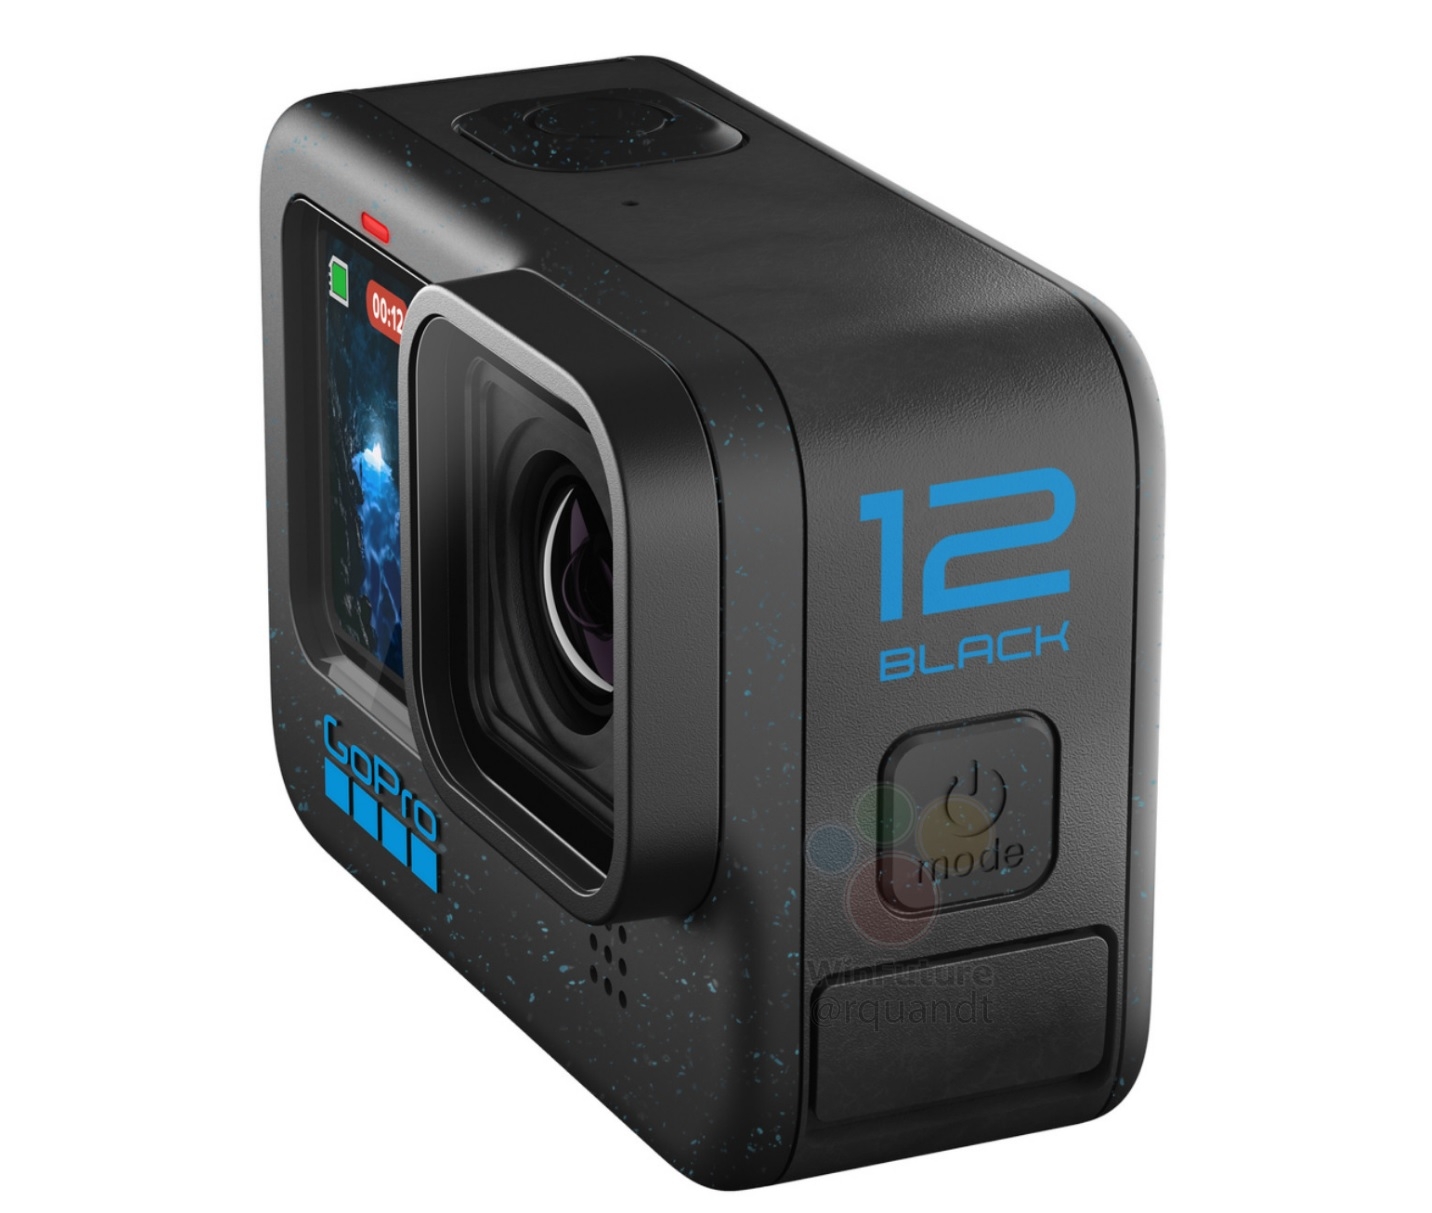 GoPro unveils its latest action camera, the Hero12 Black